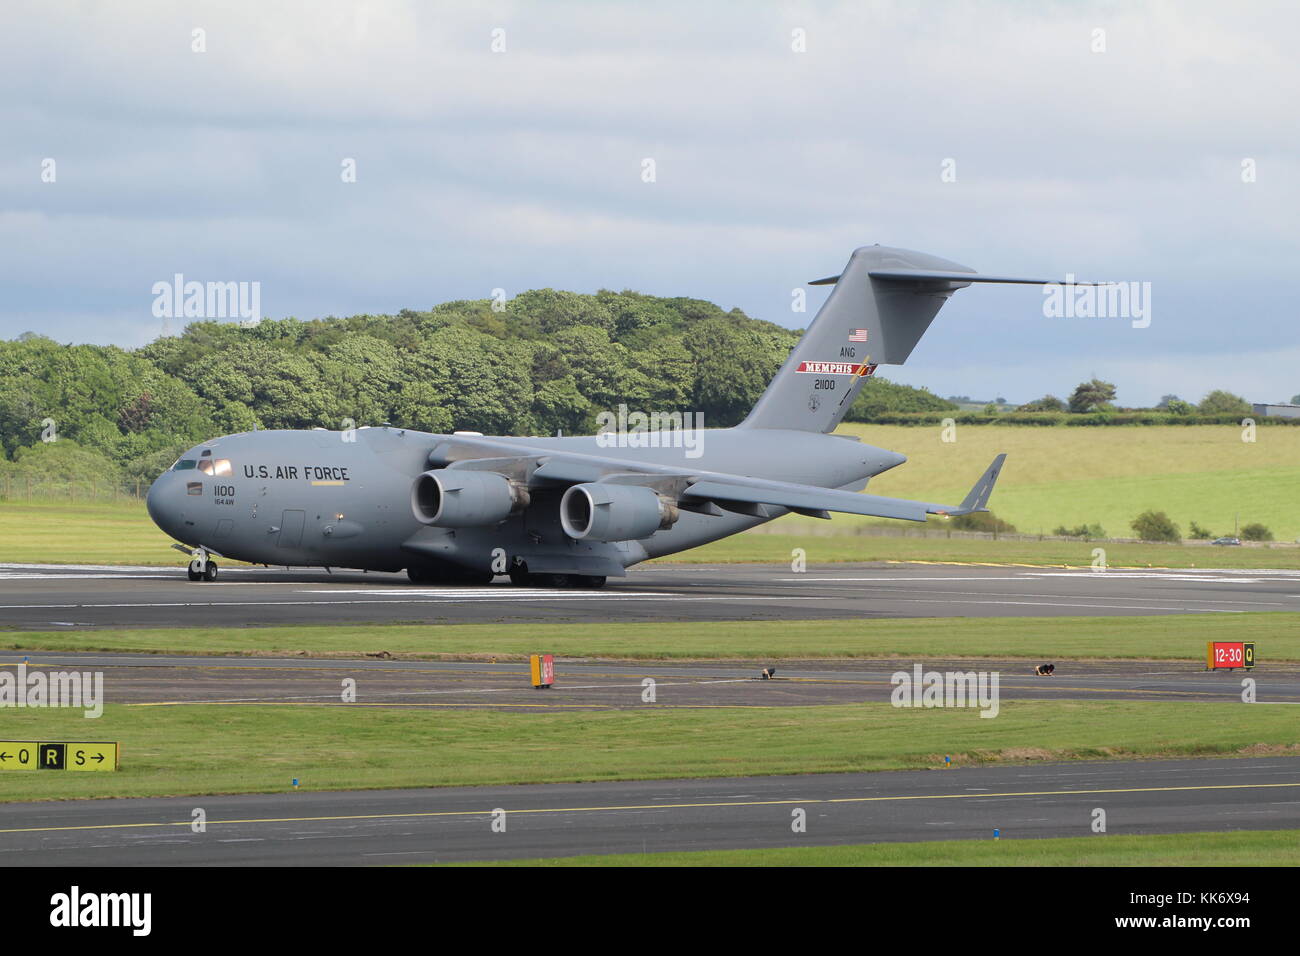 02-1100, a Boeing C-17A Globemaster III operated by the United States Air Force's 164th Airlift Wing, at Prestwick Airport in Ayrshire. Stock Photo